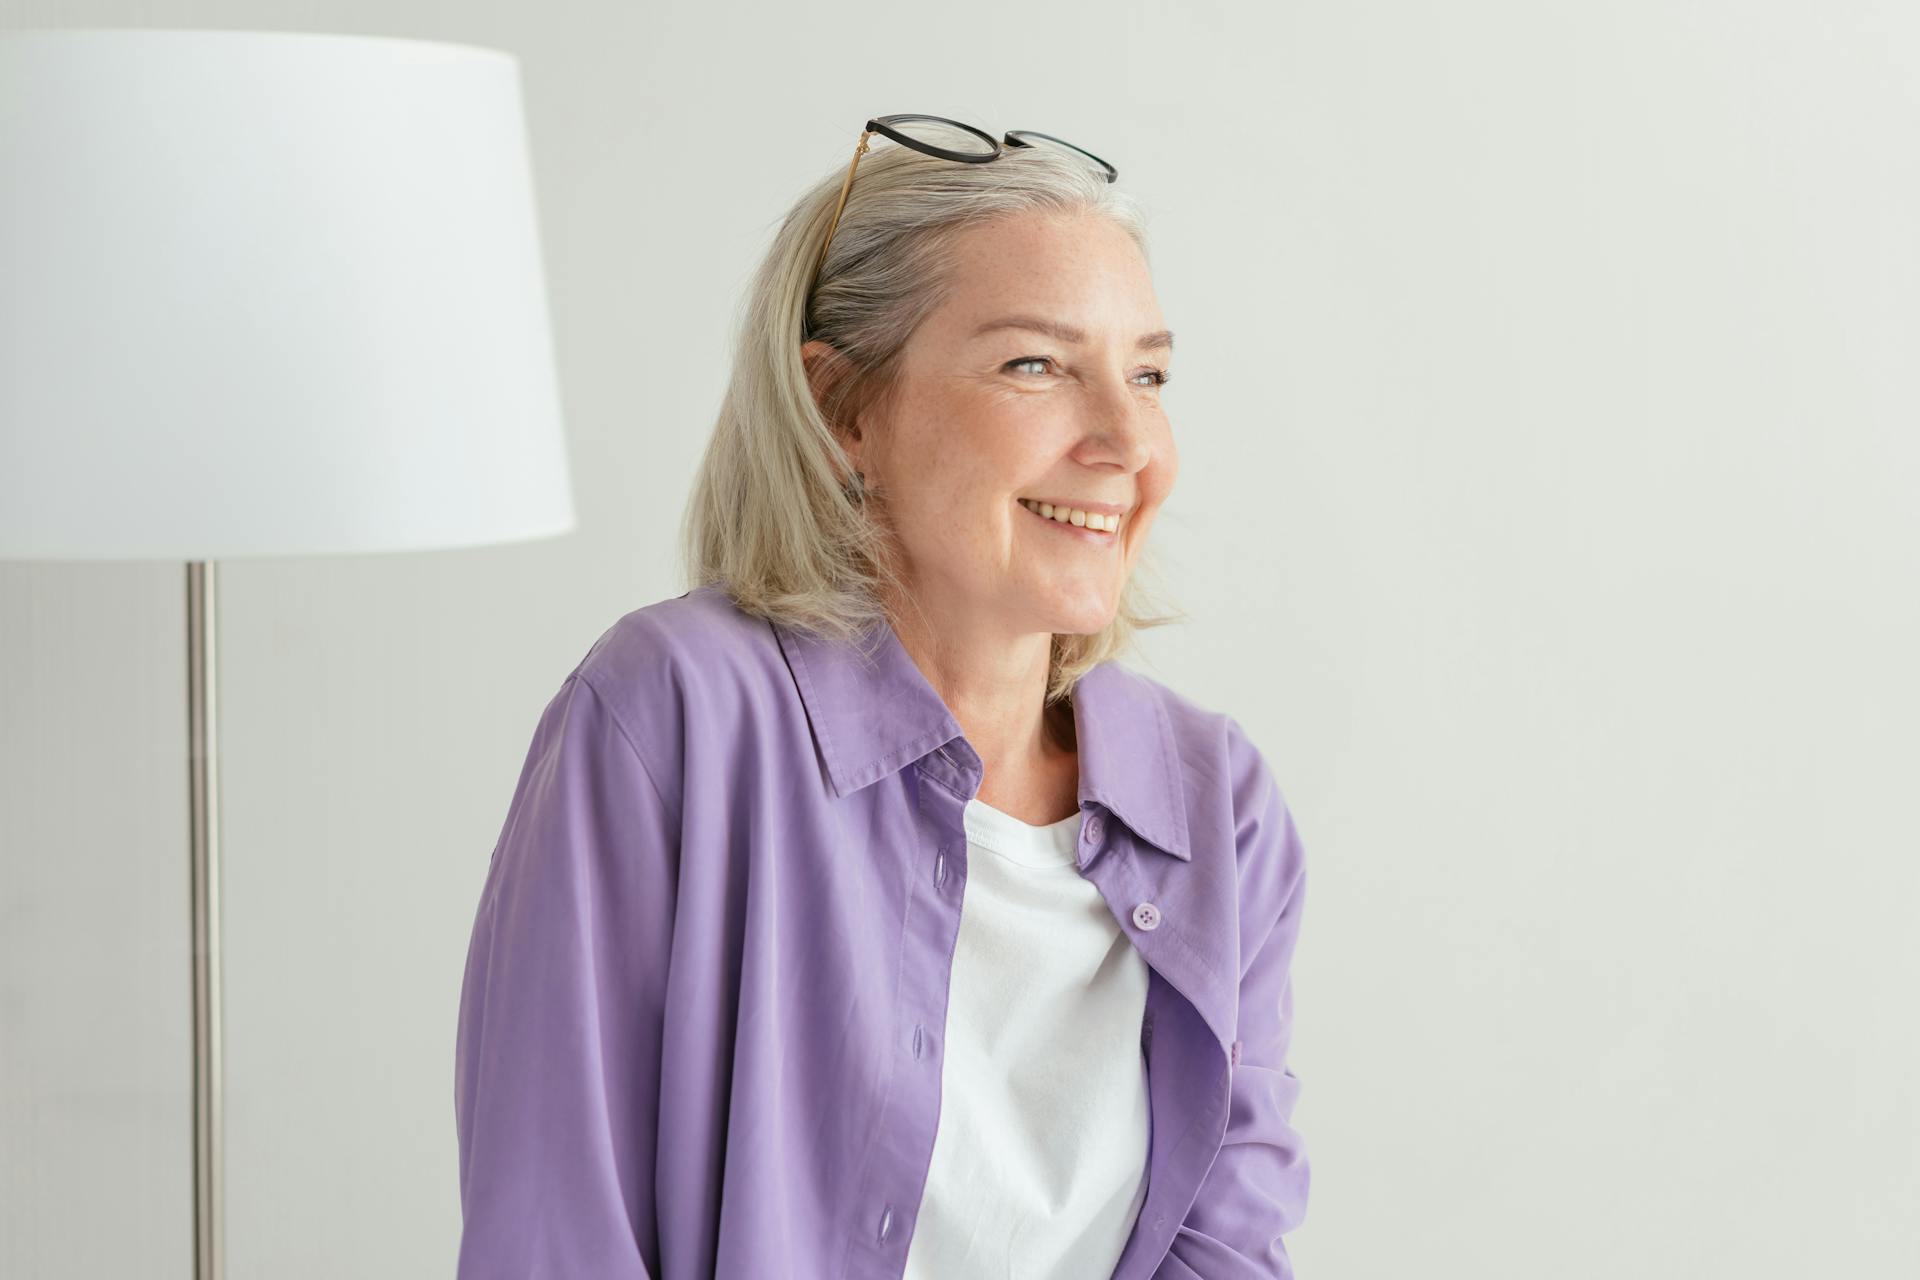 A mature woman smiling kindly | Source: Pexels